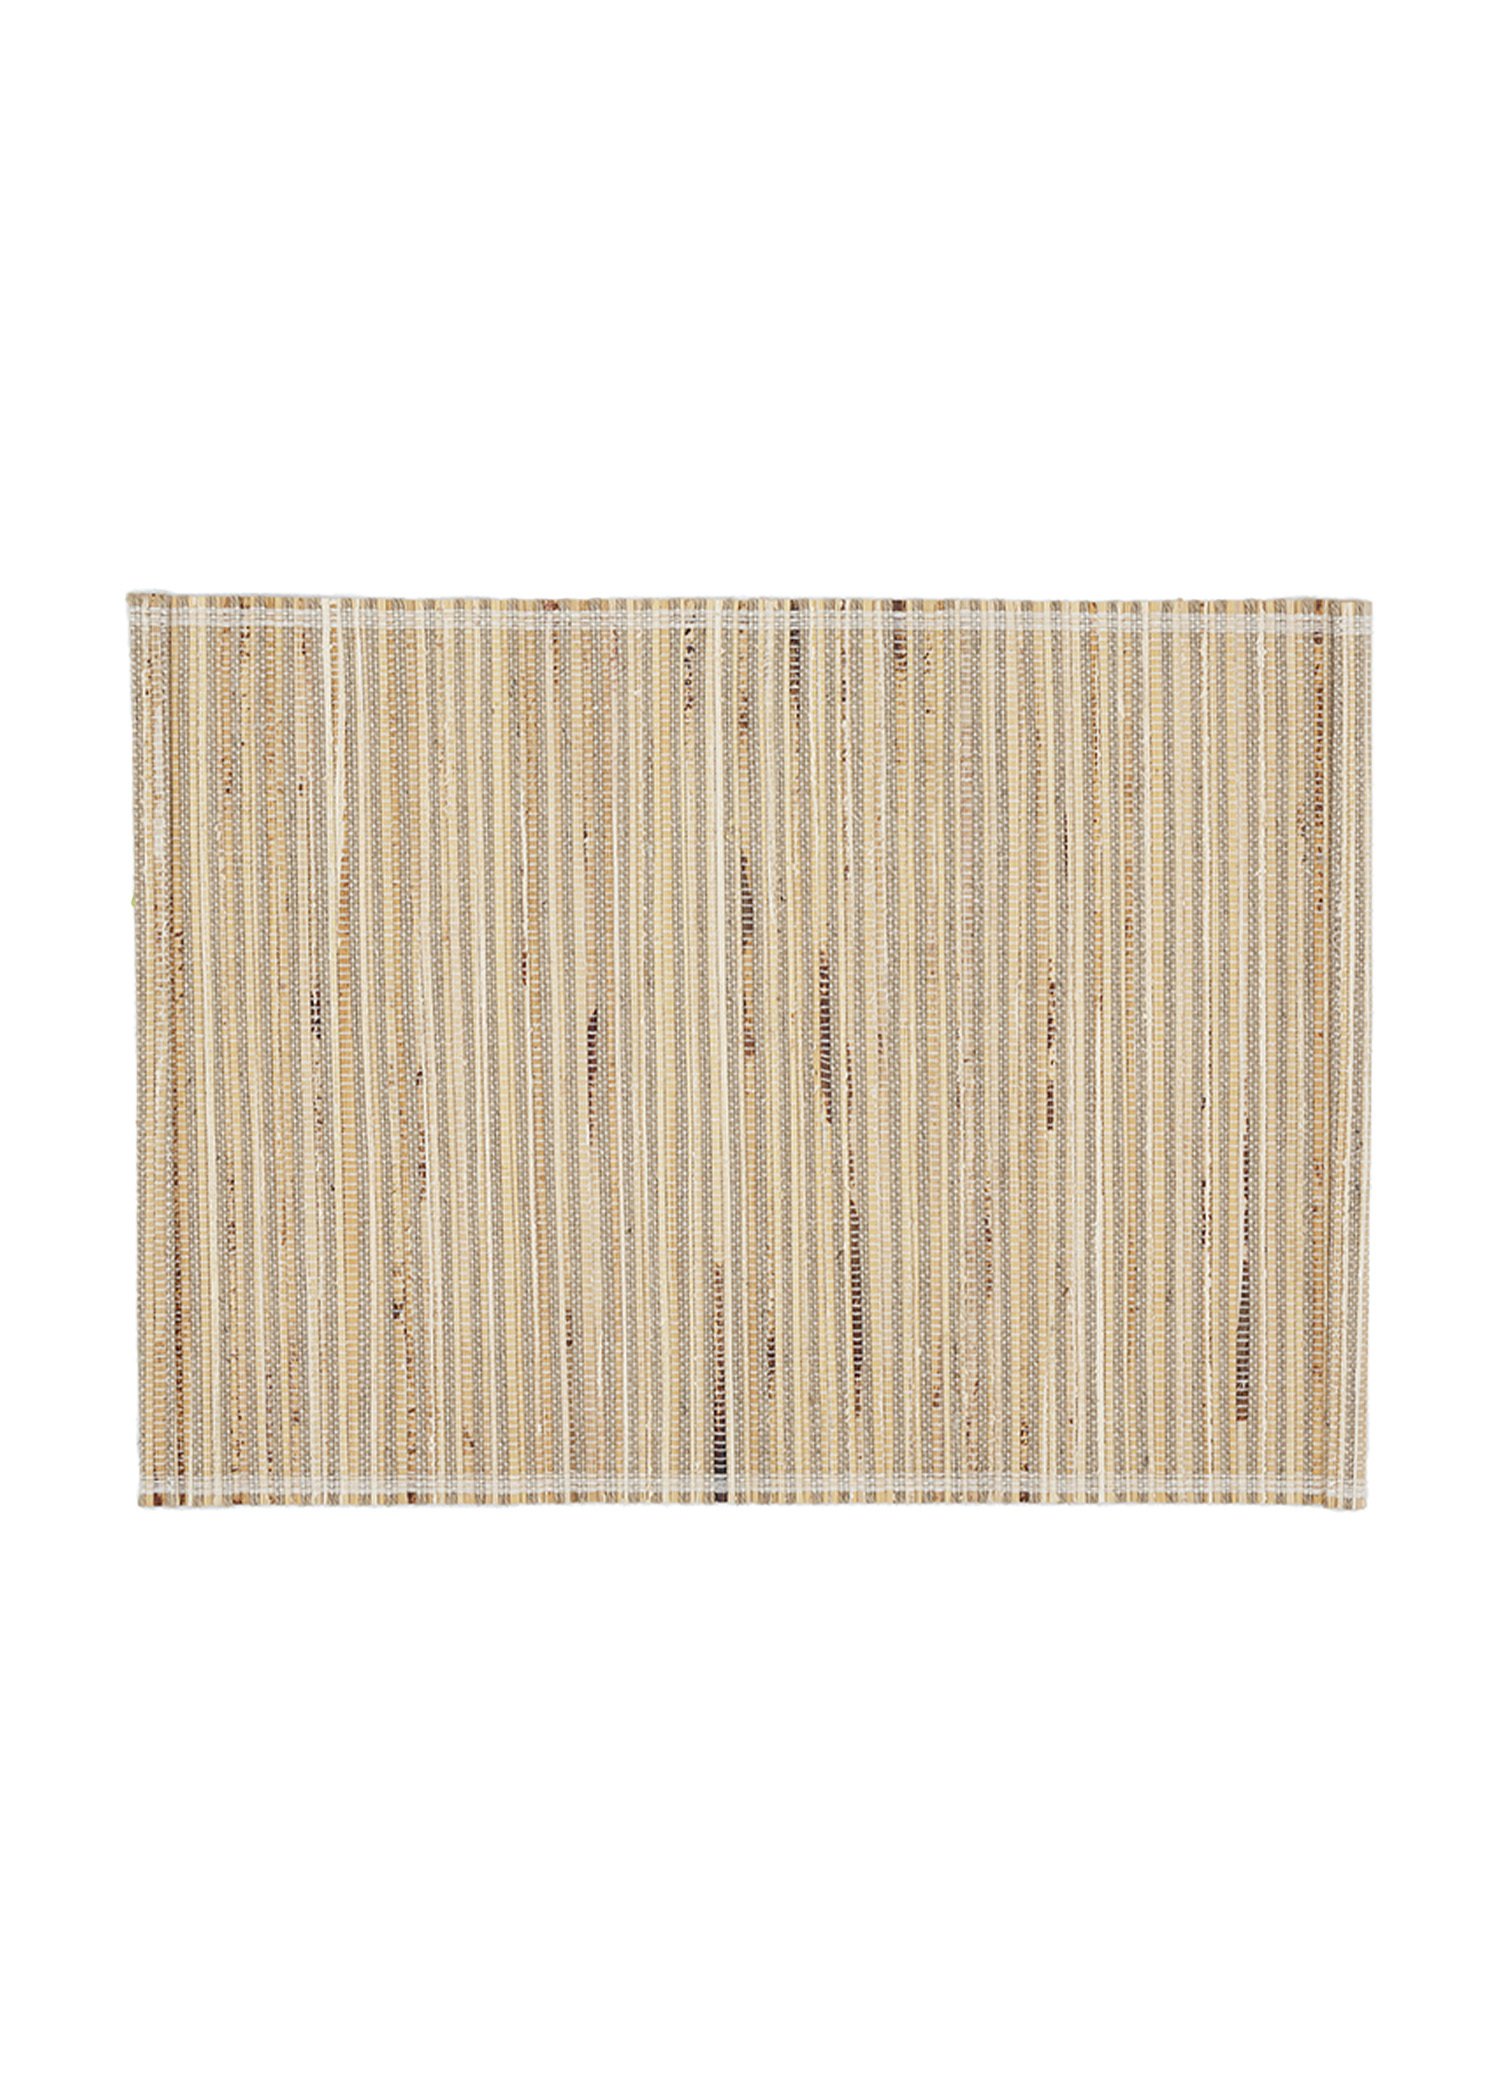 Handwoven straw placemat